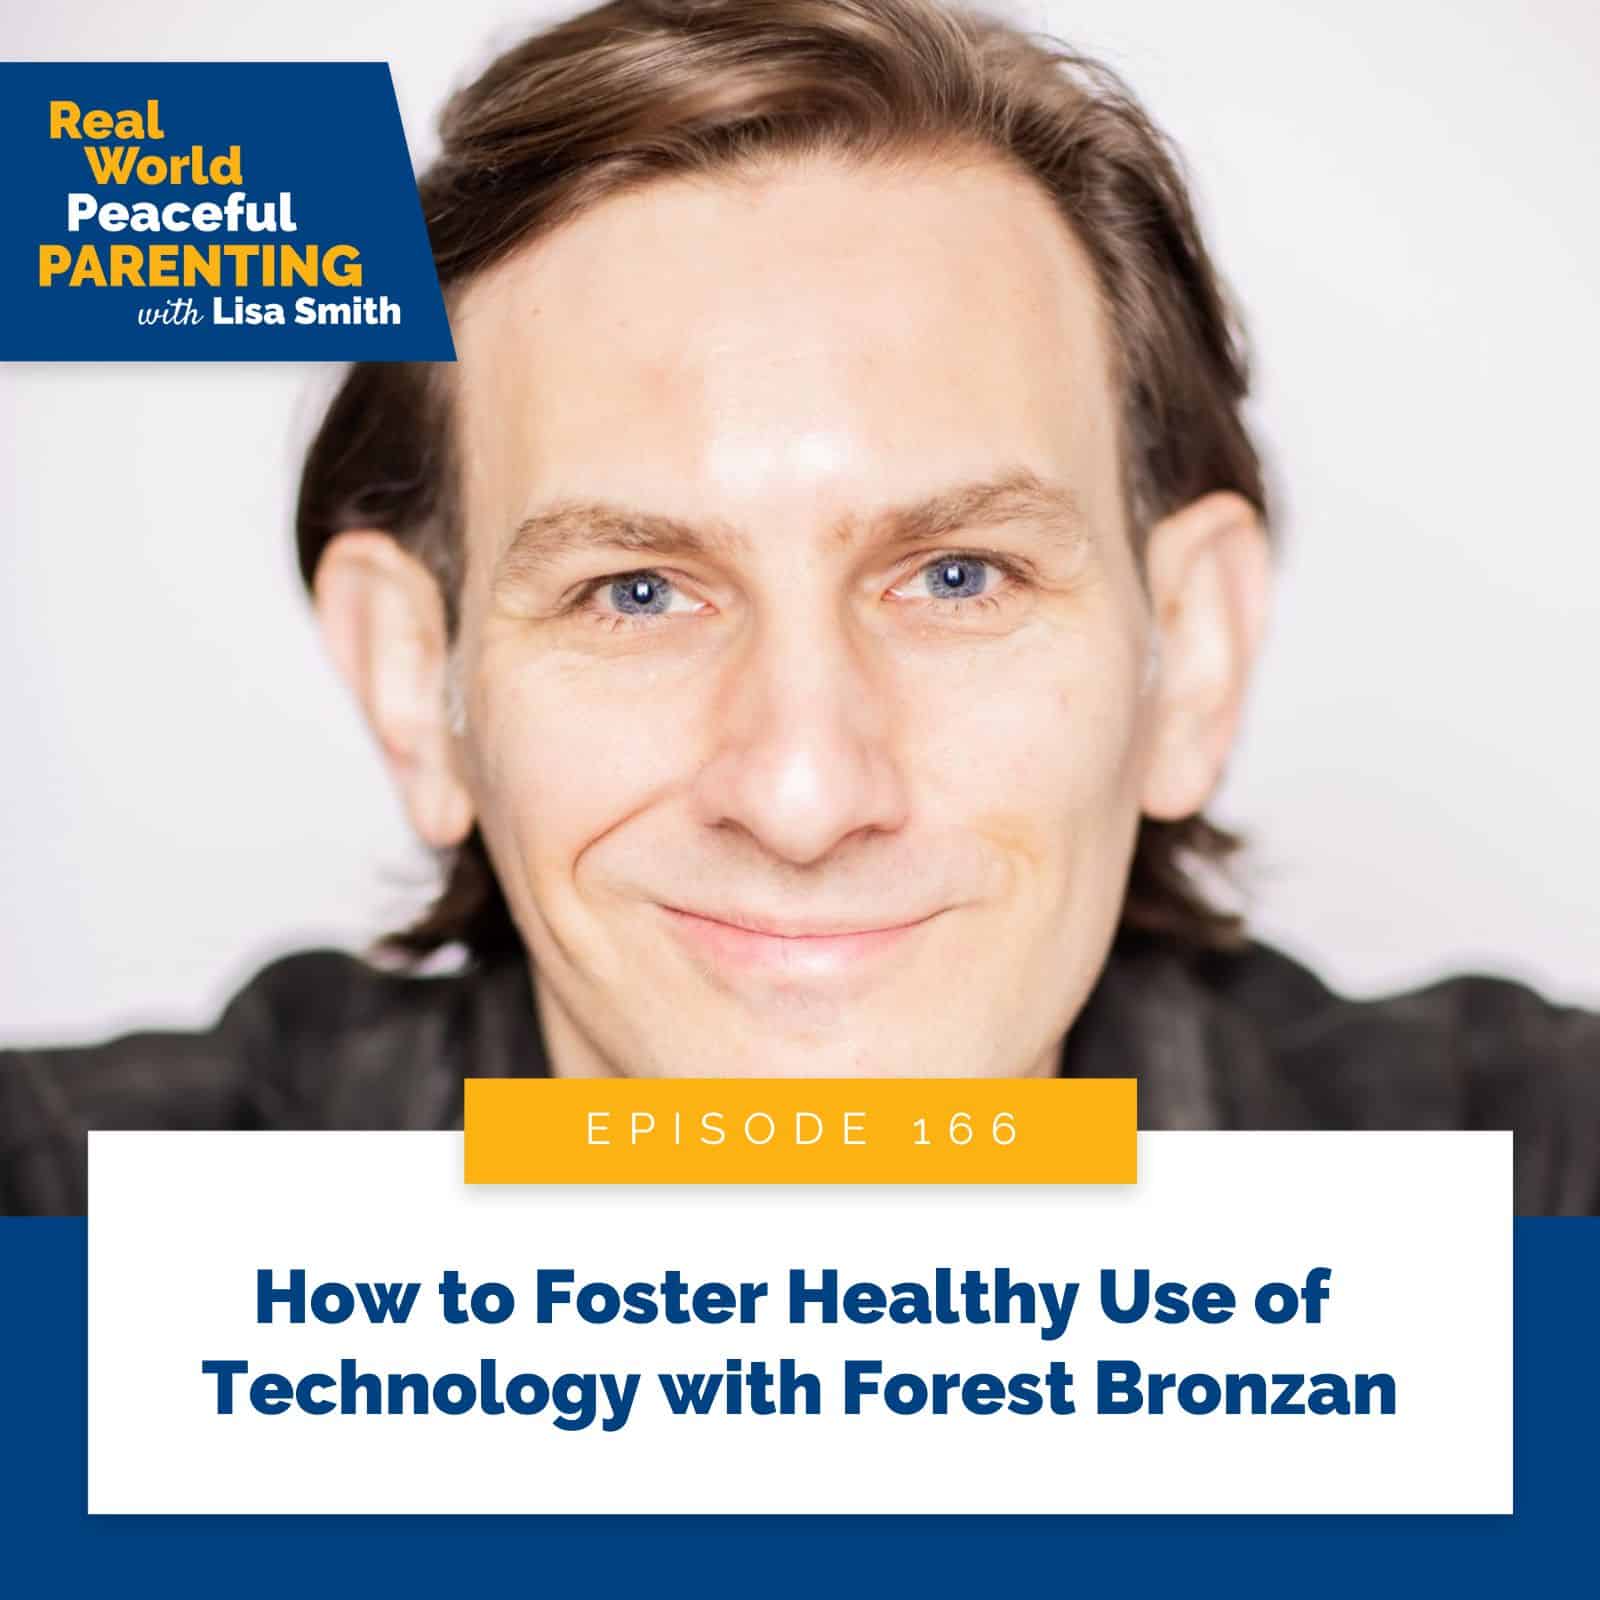 Real World Peaceful Parenting with Lisa Smith | How to Foster Healthy Use of Technology with Forest Bronzan